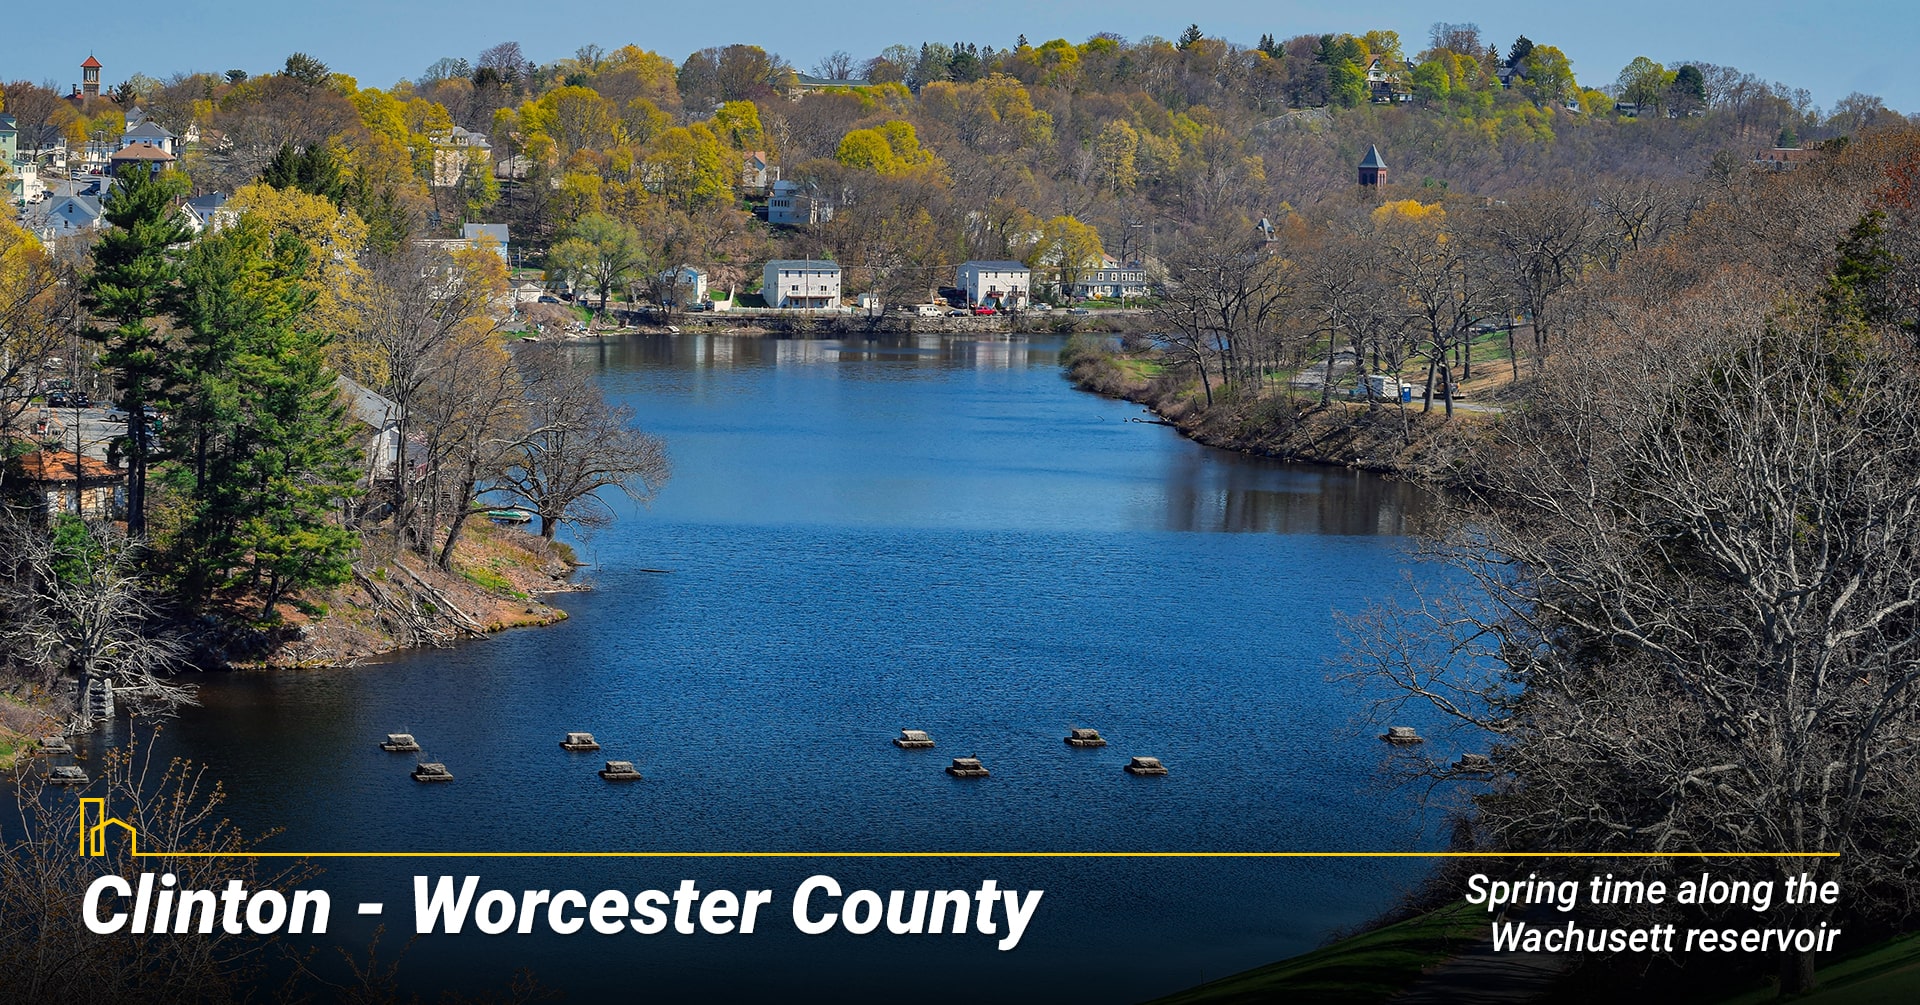 Clinton -Worcester County